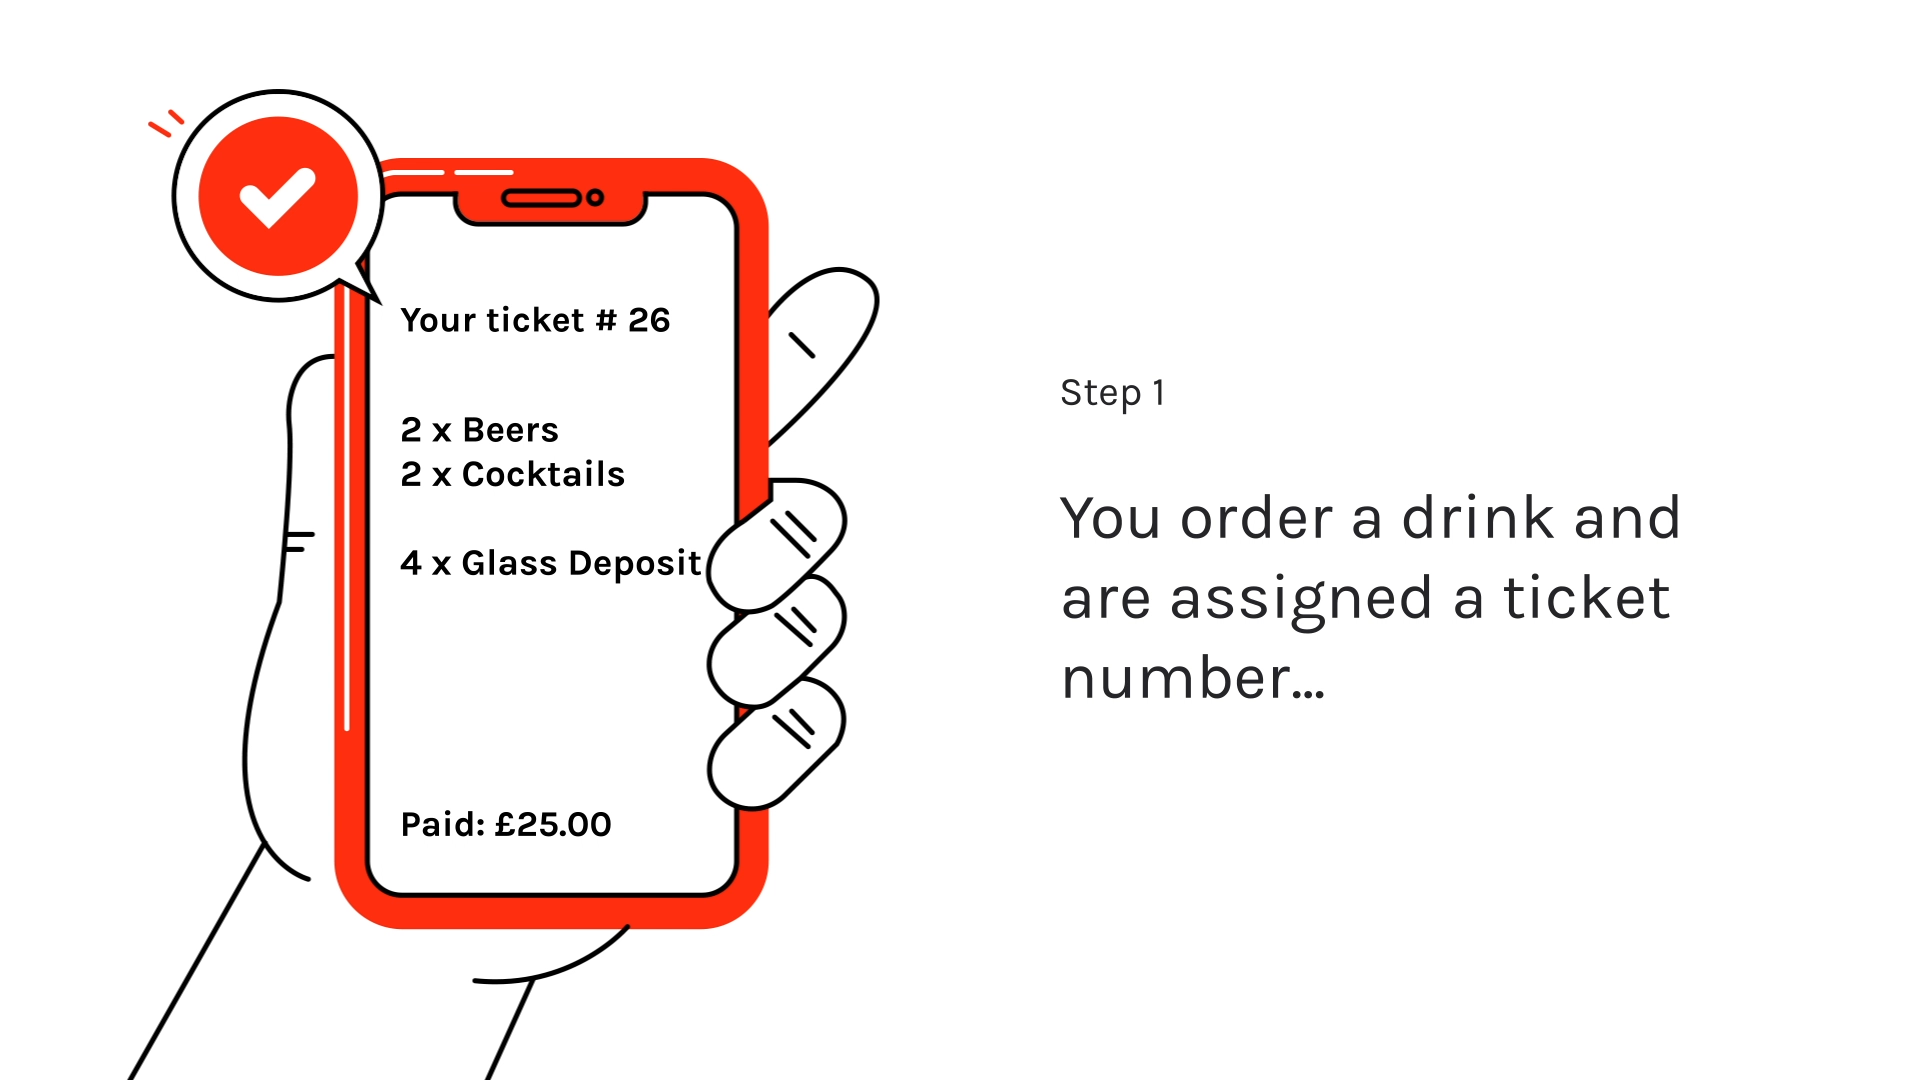 Order of drinks receipt shown on phone